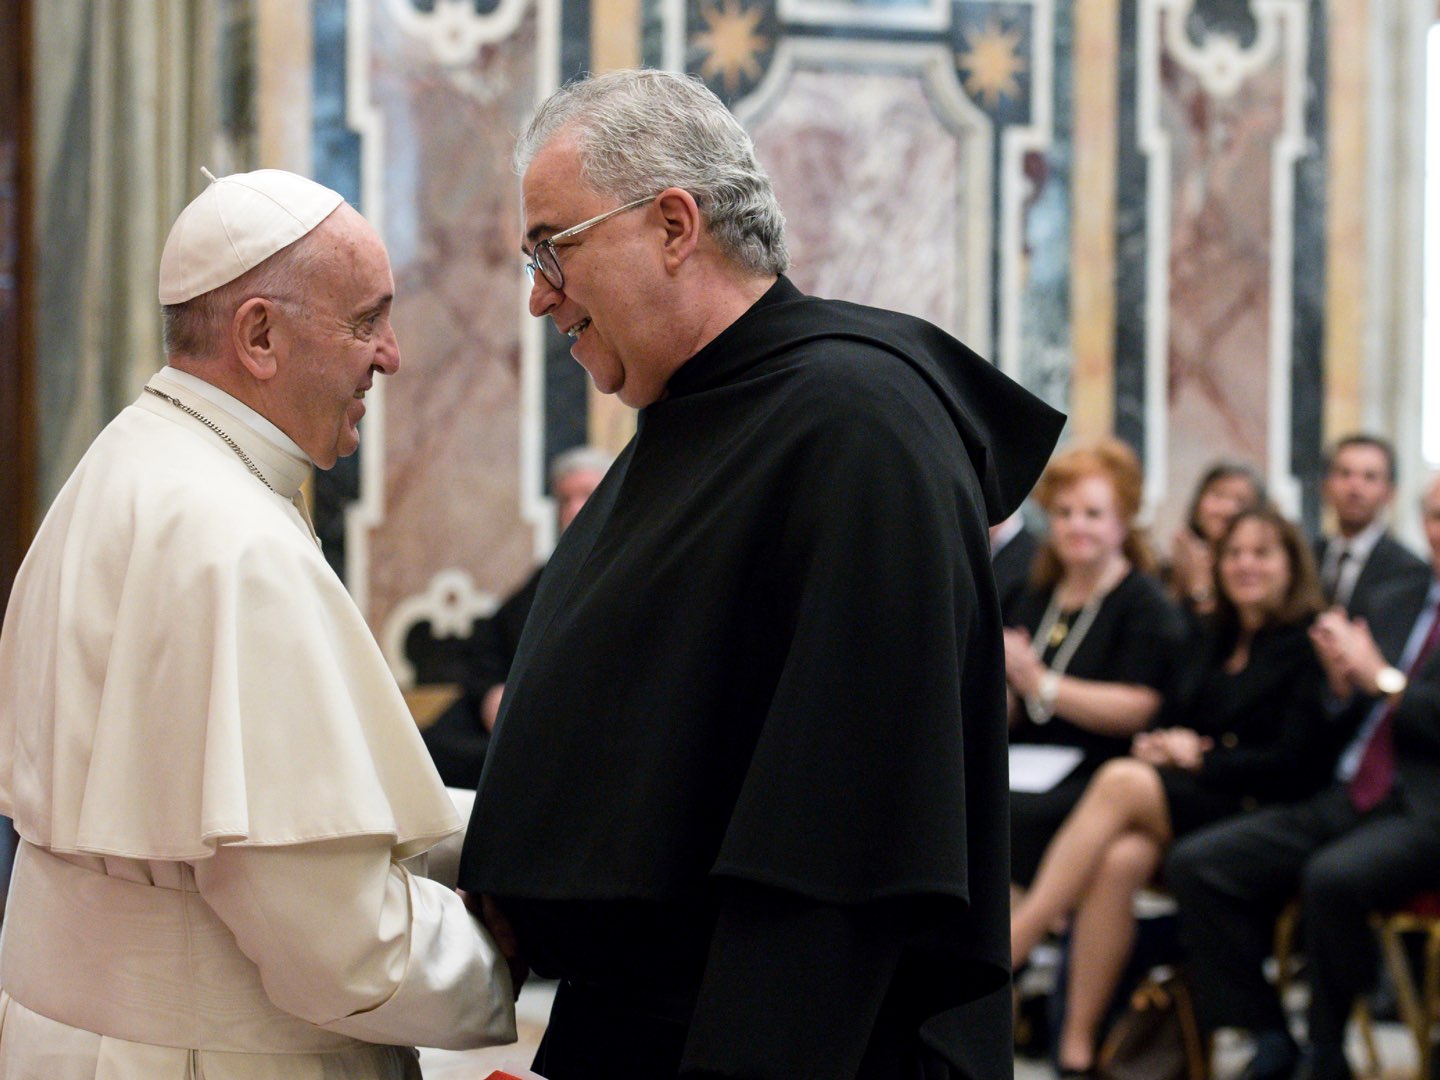 Pope Francis shakes hands with Villanova University President the Reverend Peter M. Donohue.